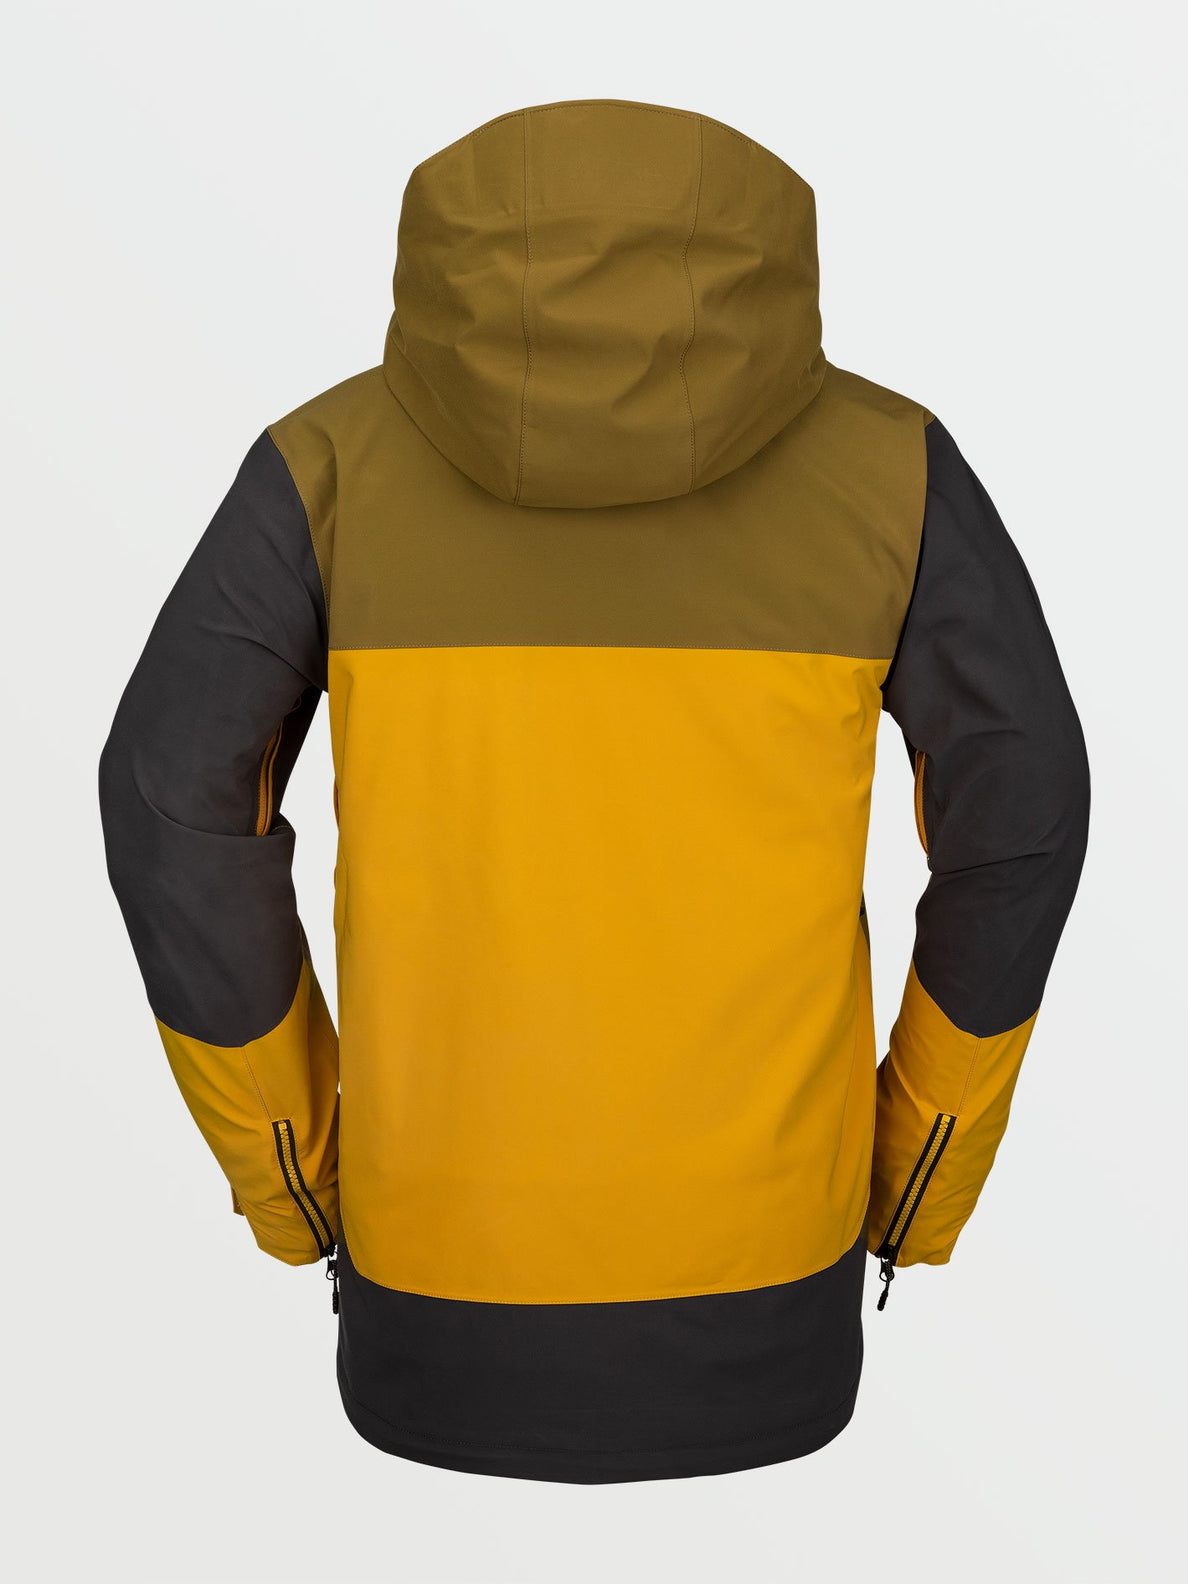 BL Stretch GORE-TEX Jacket - Resin Gold – Volcom Europe